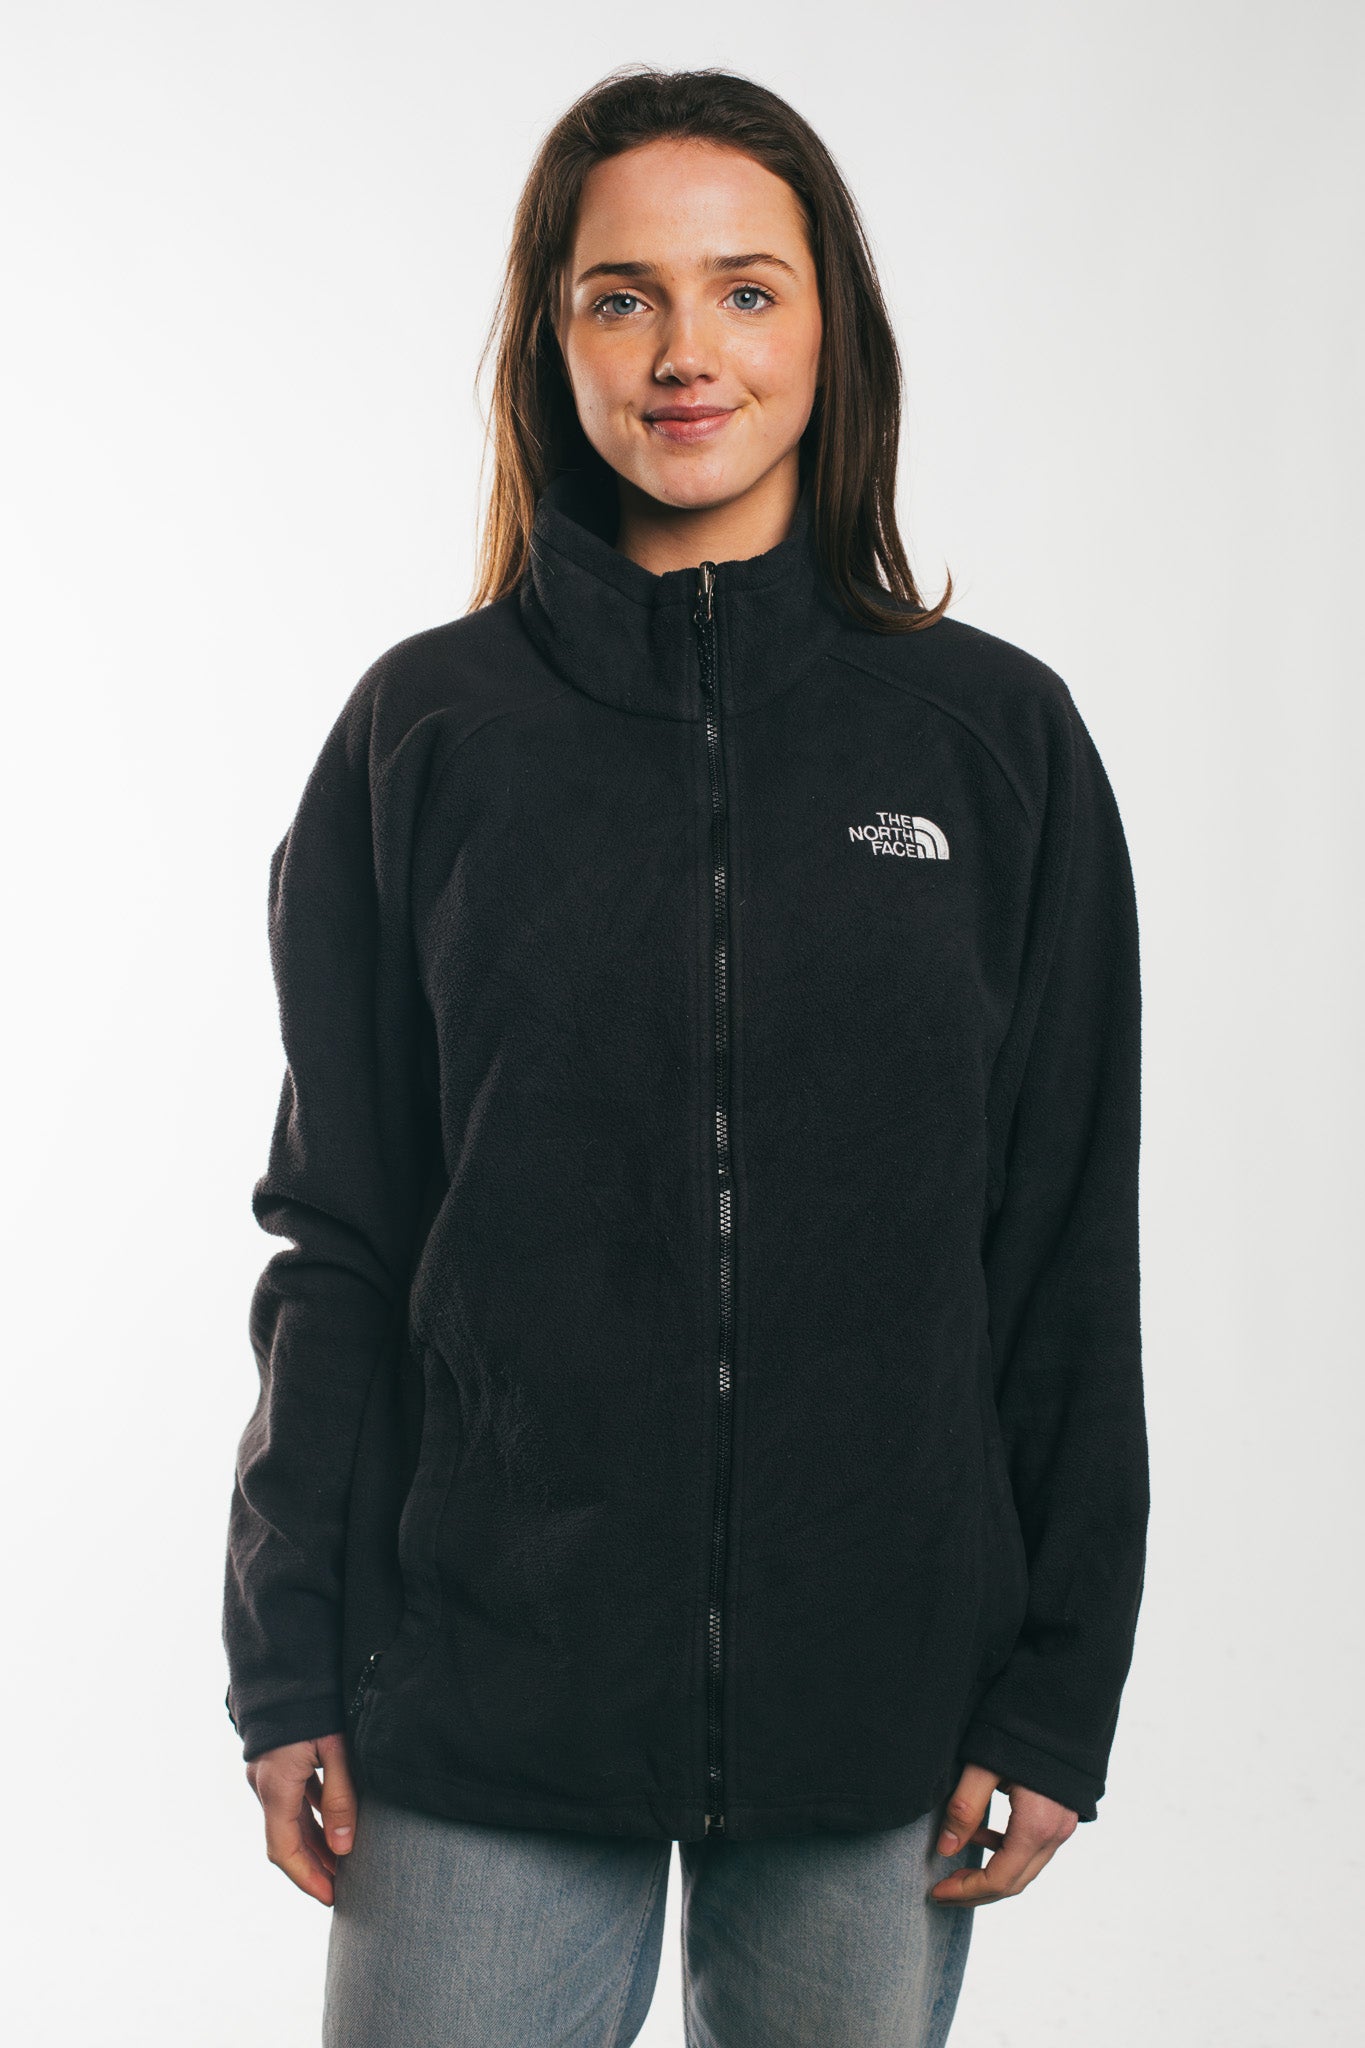 The North Face - Fleece Jacket (M)